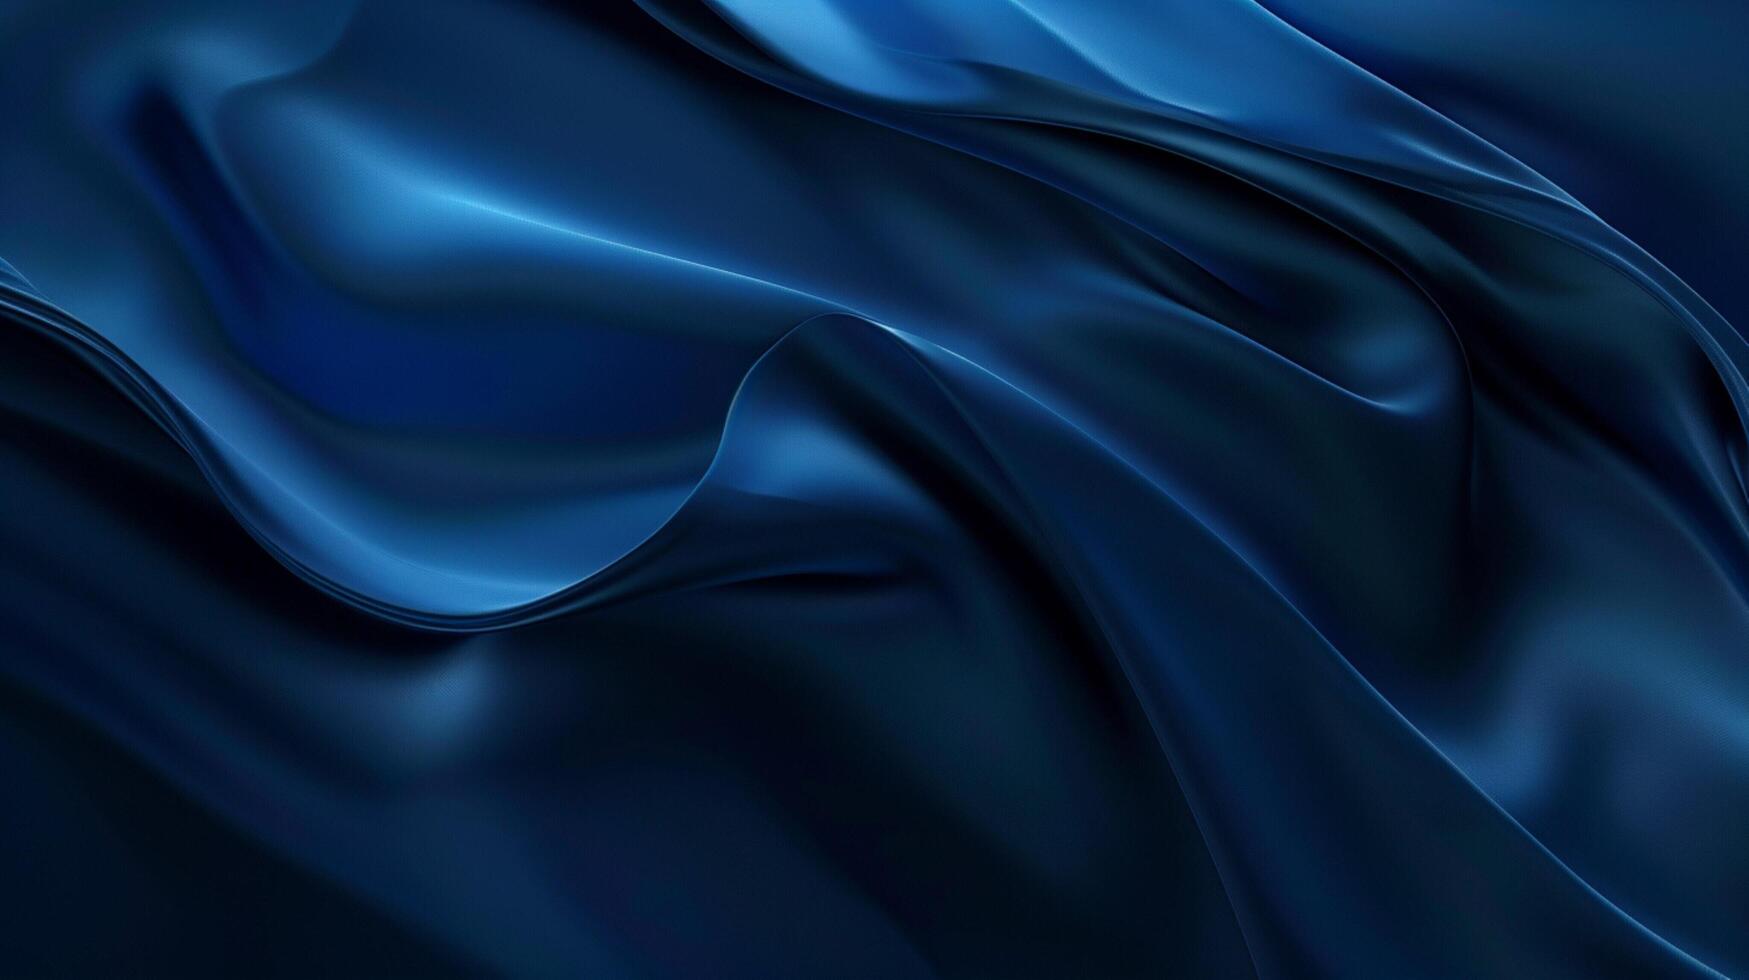 abstract luxury gradient blue background photo